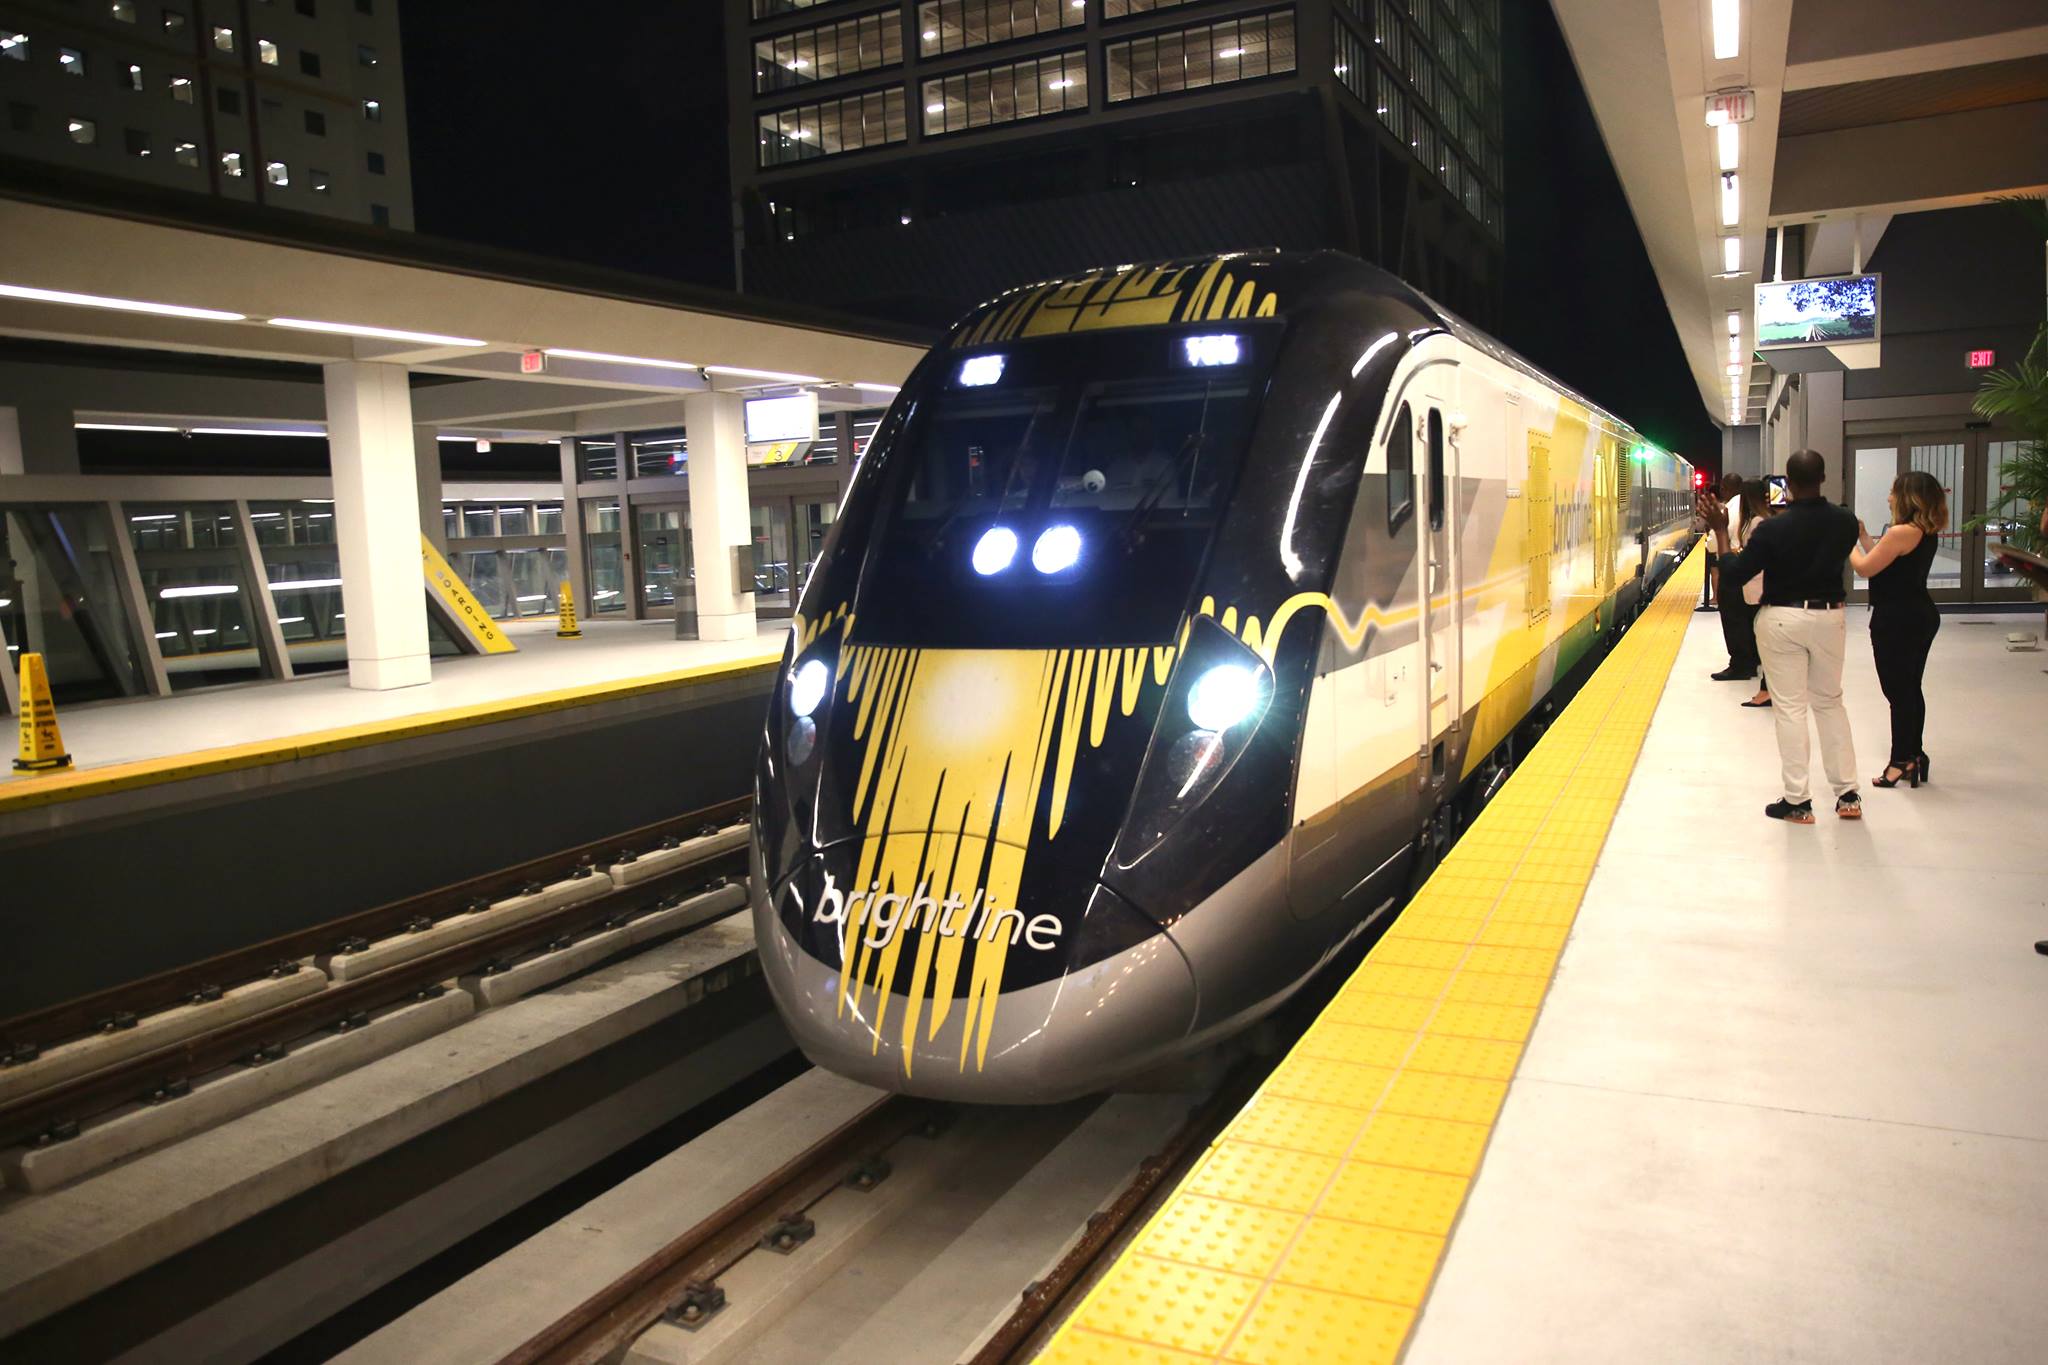 The front of a Brightline high-speed train.